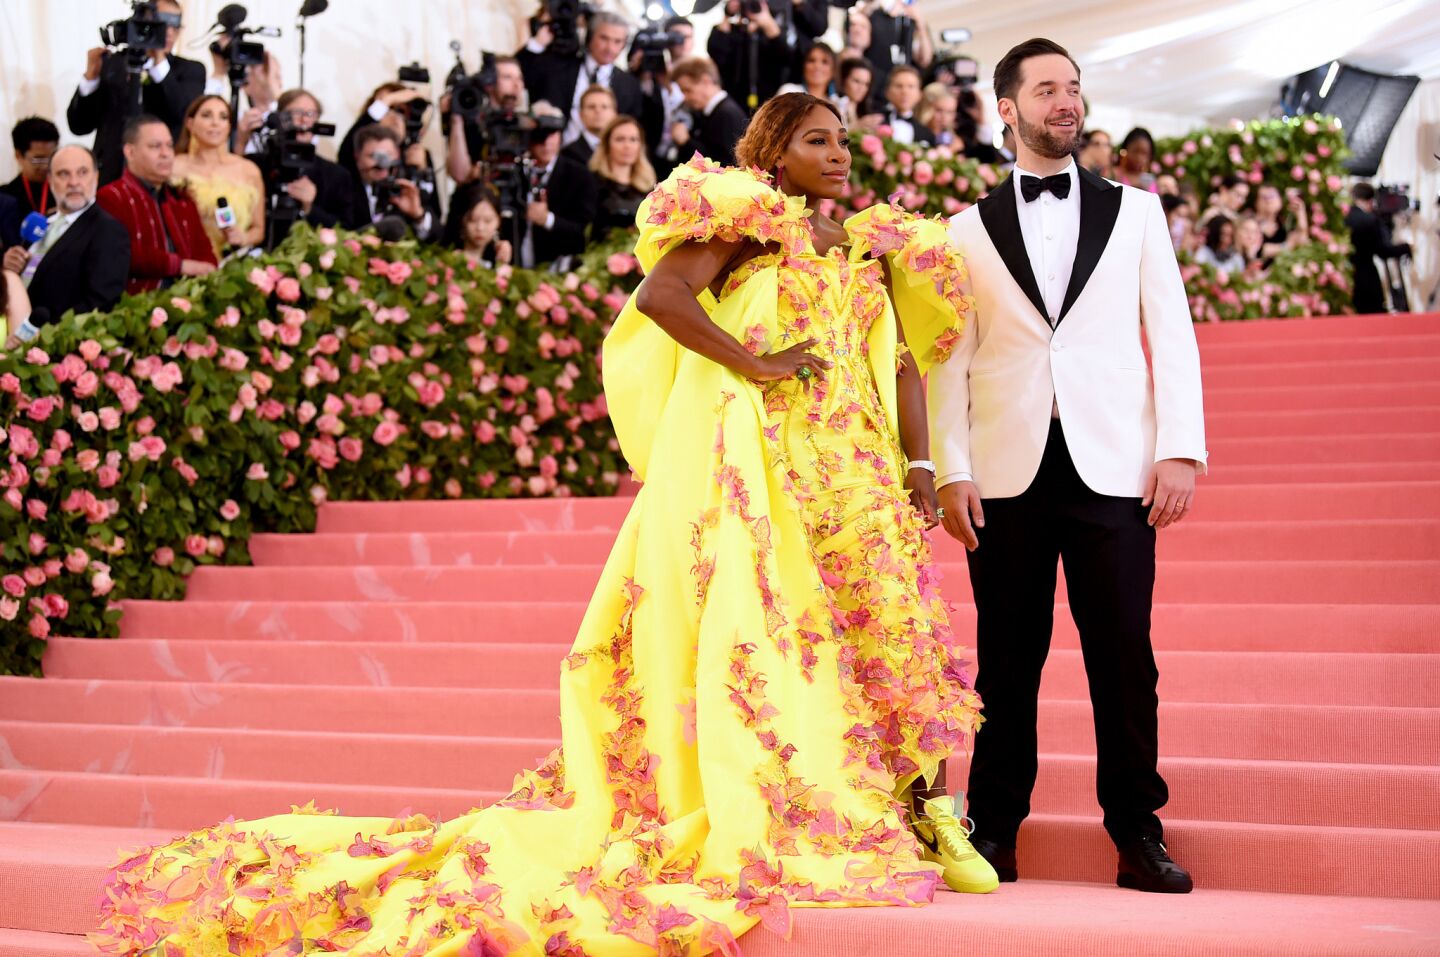 2019 Met Gala co-chair Serena Williams and husband Alexis Ohanian arrive. Instead of heels, the tennis star wears yellow Nike sneakers with her yellow custom Versace gown, which is festooned with pink, purple and yellow appliques resembling butterflies.